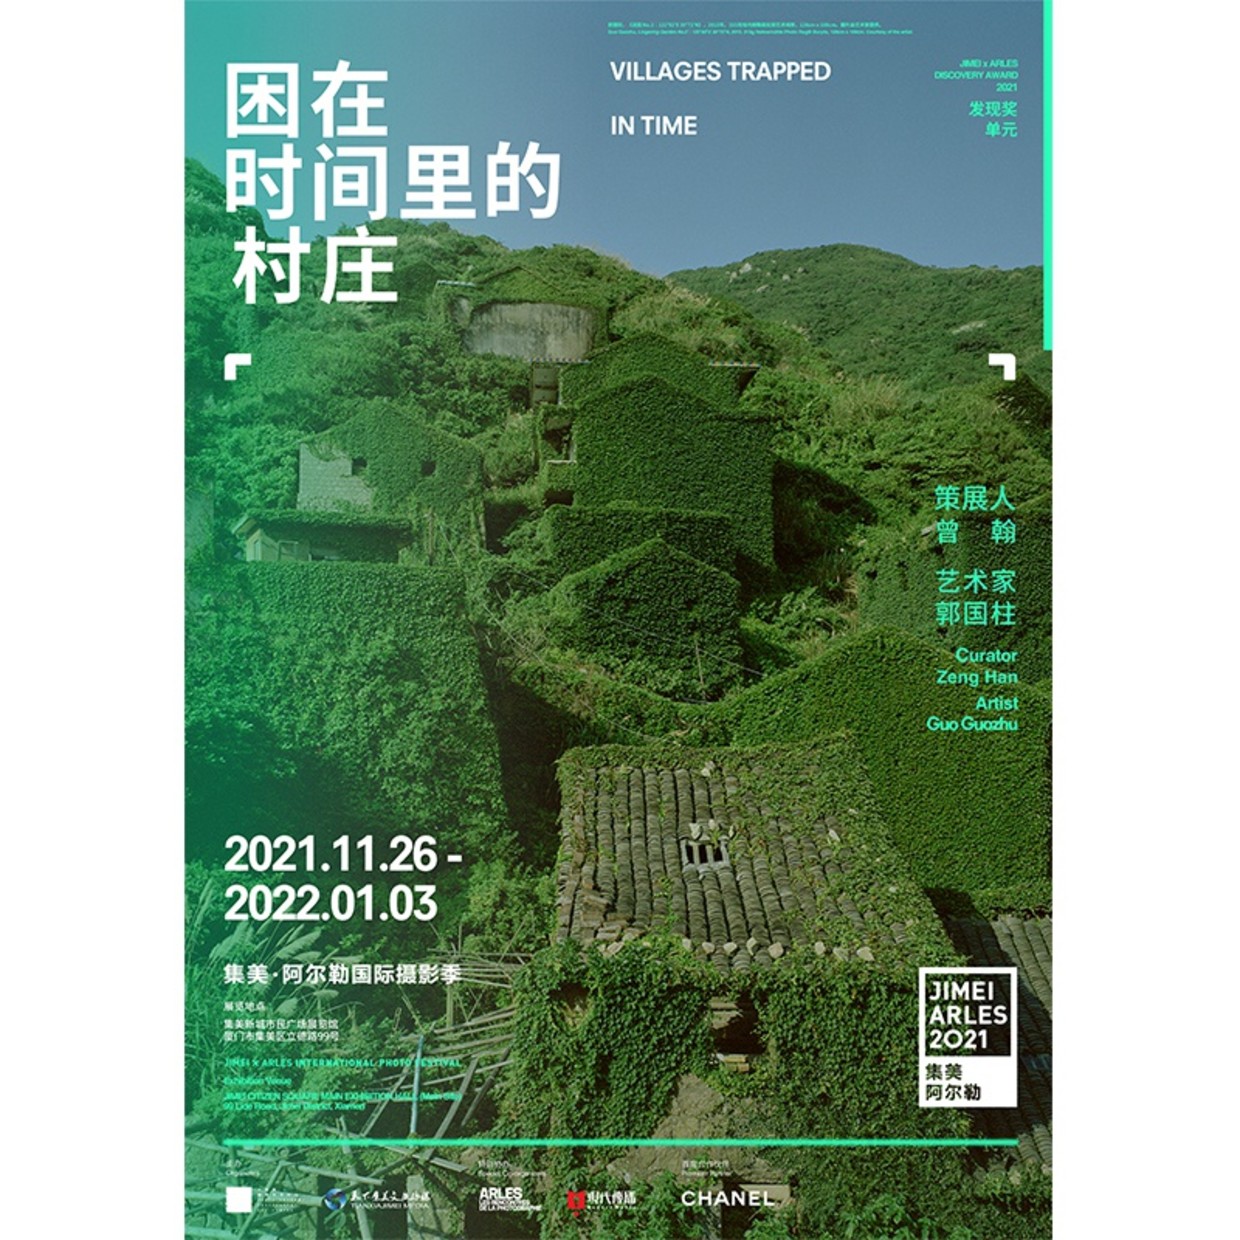 GUO GUOZHU Villages Trapped in Time Curated by Zeng Han In a sense, ruins are the representations and symbols of...